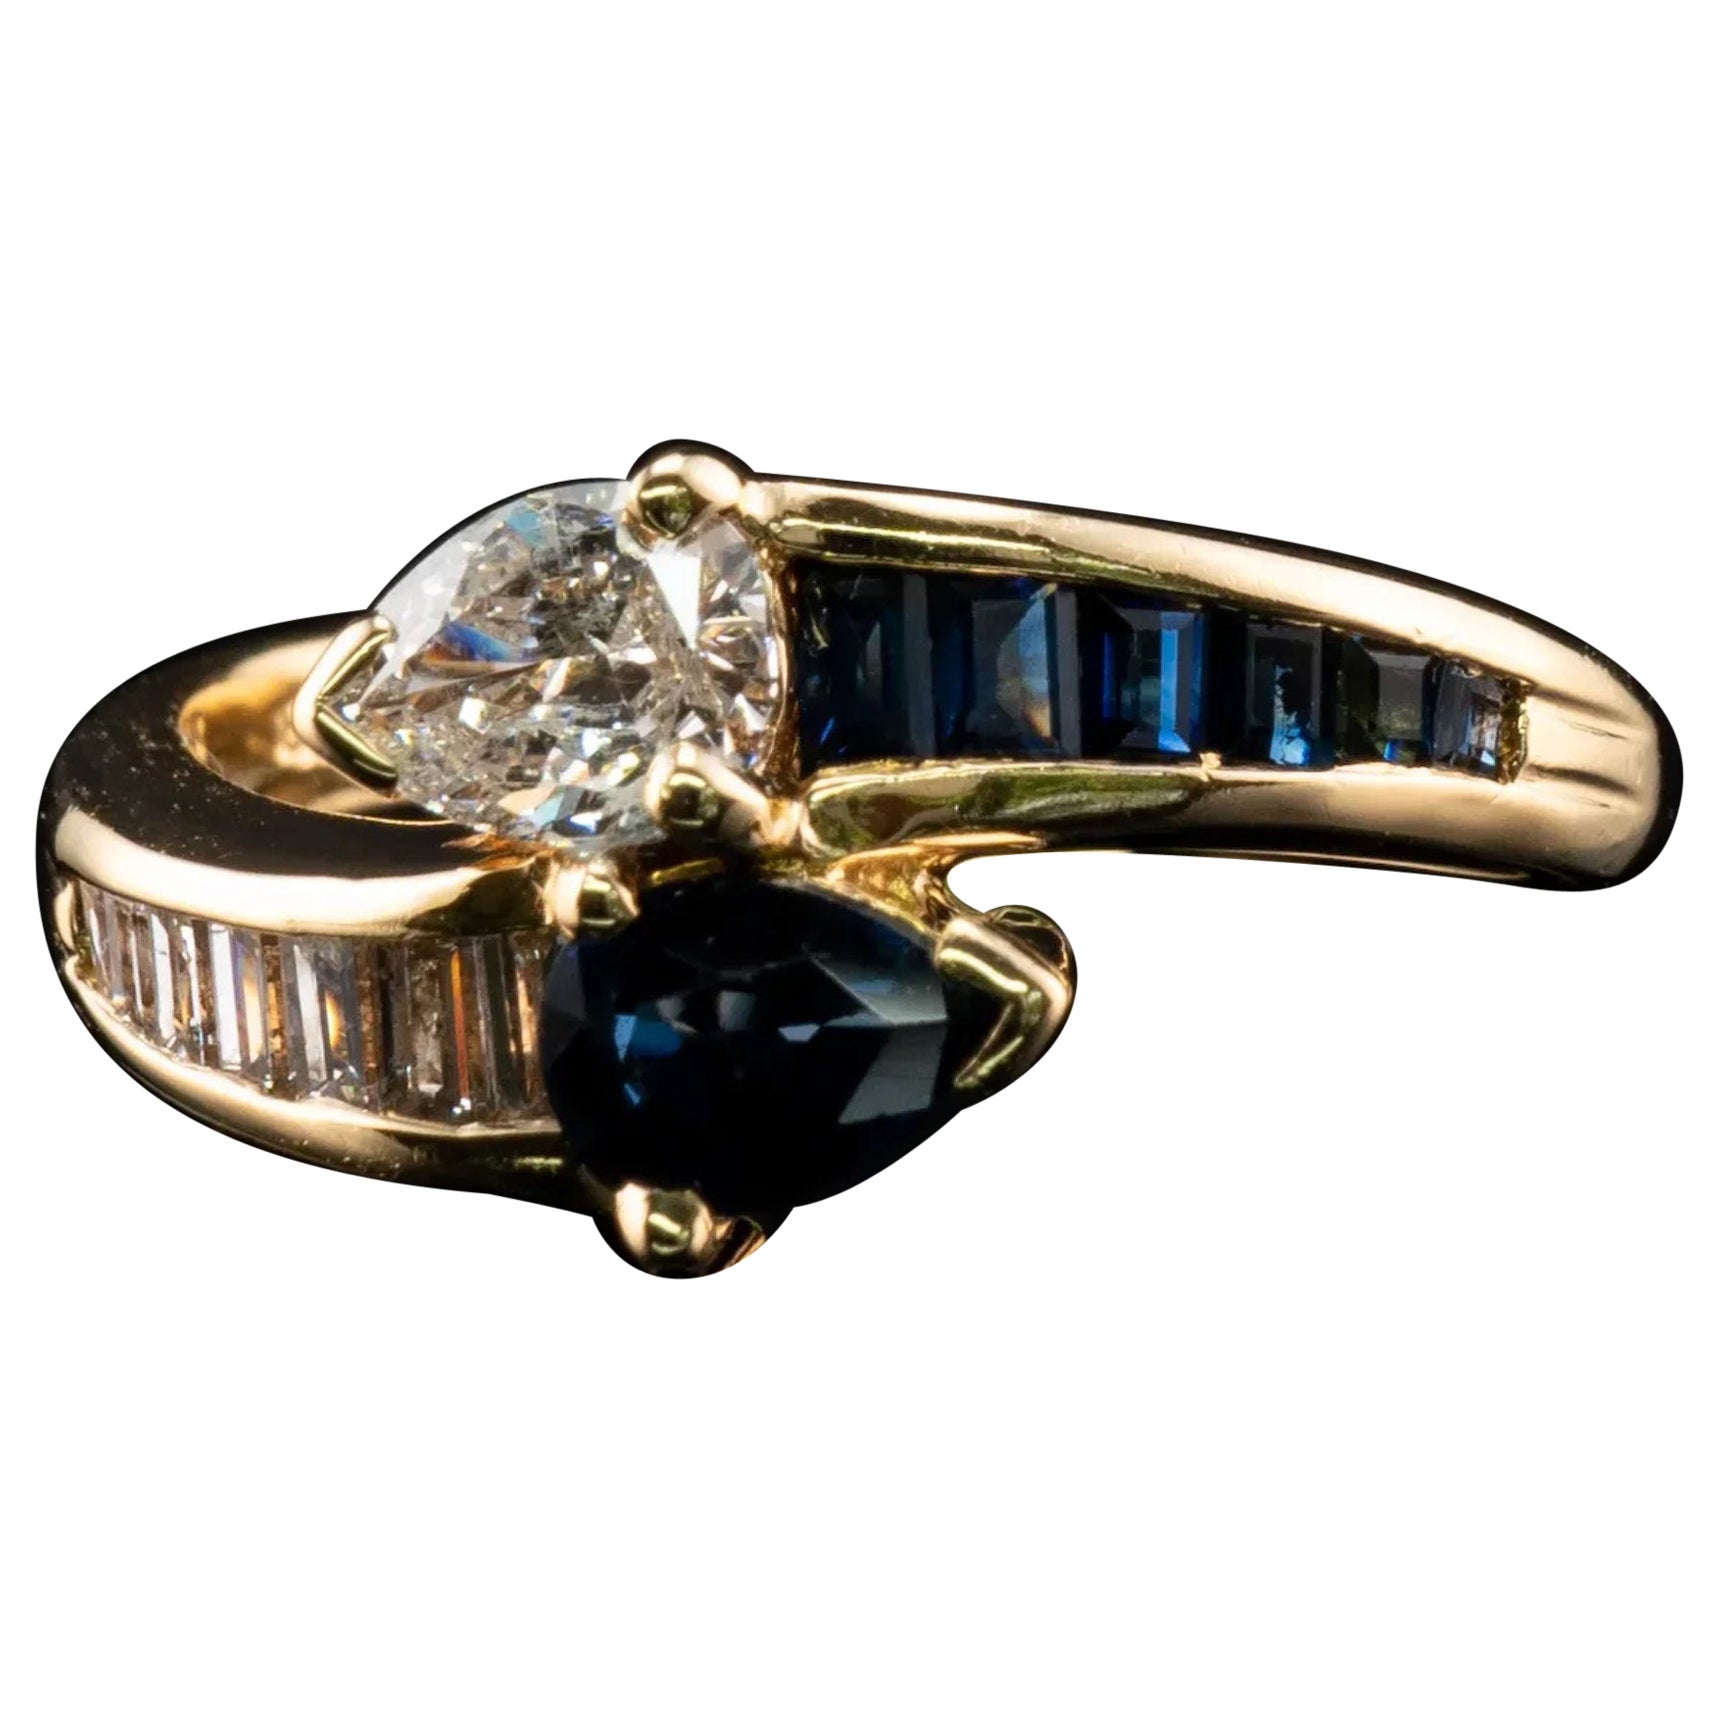 For Sale:  1.21 Pear Cut Diamond Sapphire Engagement Ring, Art Deco Snake Sapphire Ring